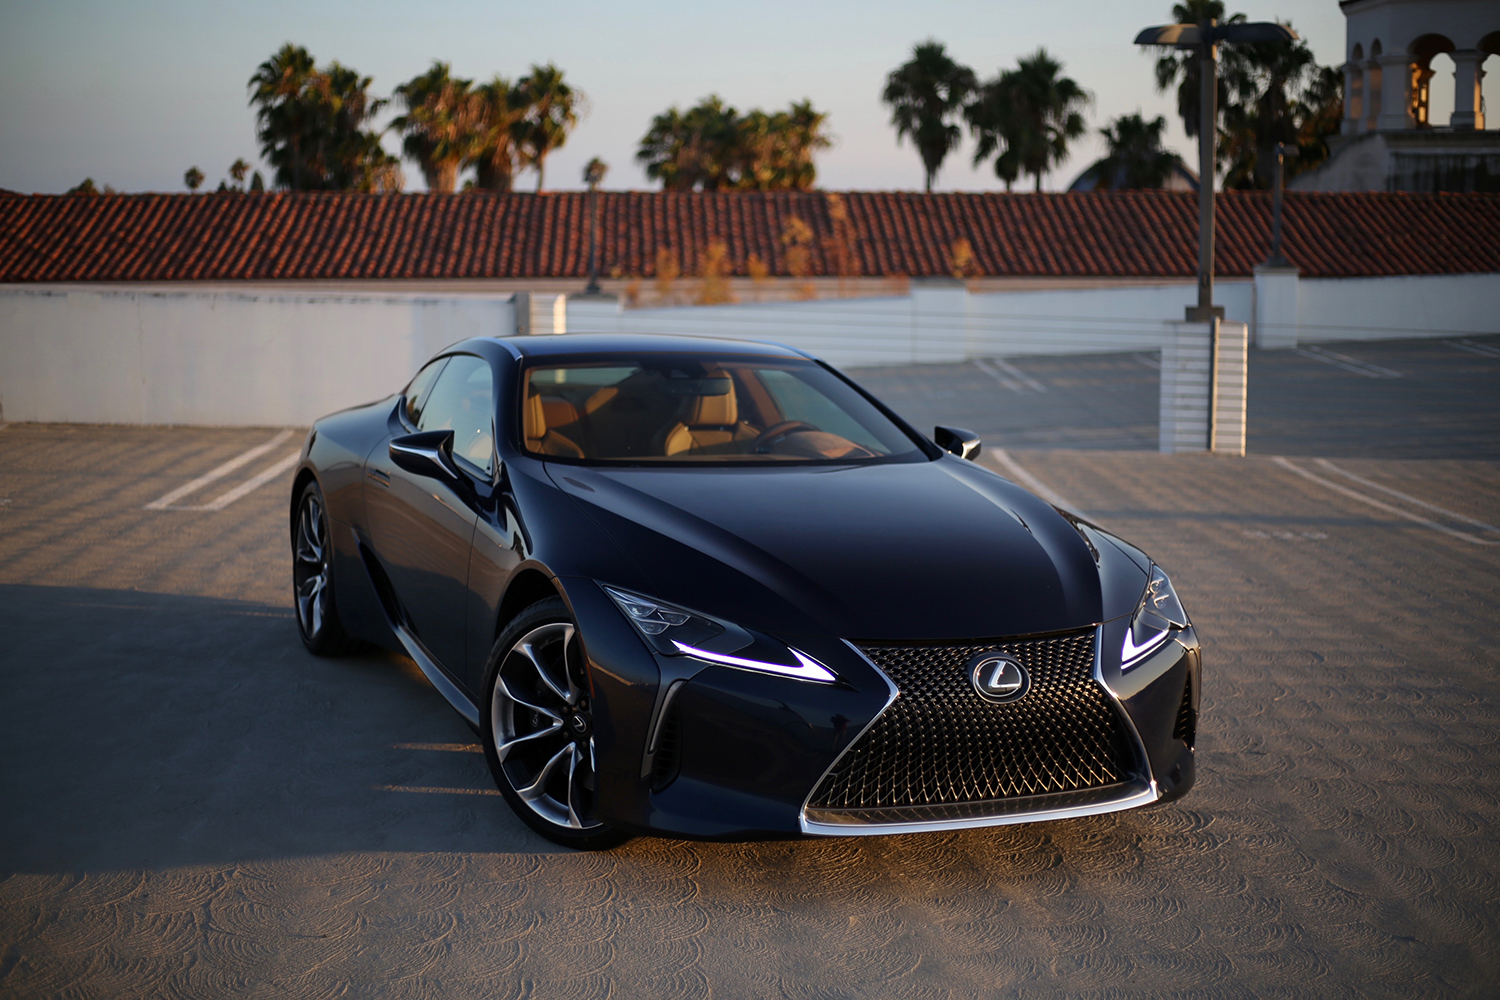 2018 Lexus LC500 Review | Pictures, Specs, Pricing | Digital Trends